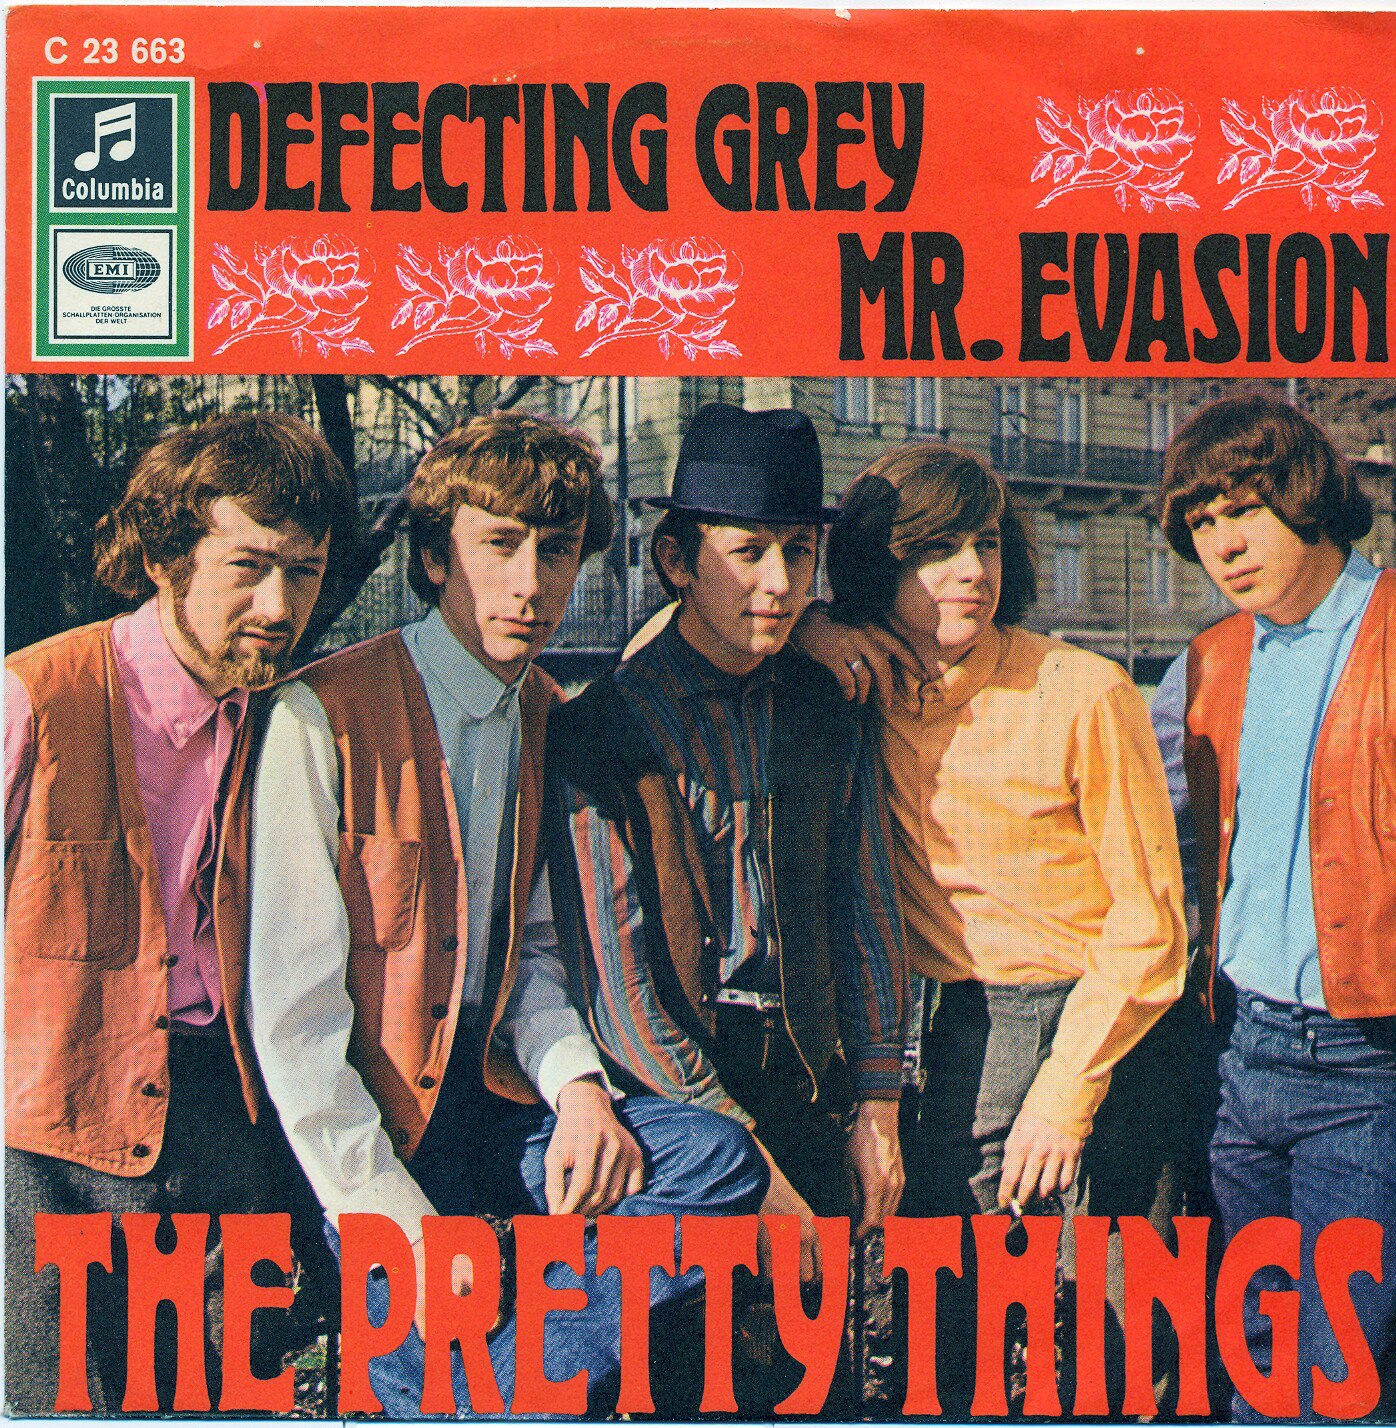 The Pretty Things - Defecting Grey / Mr. Evasion